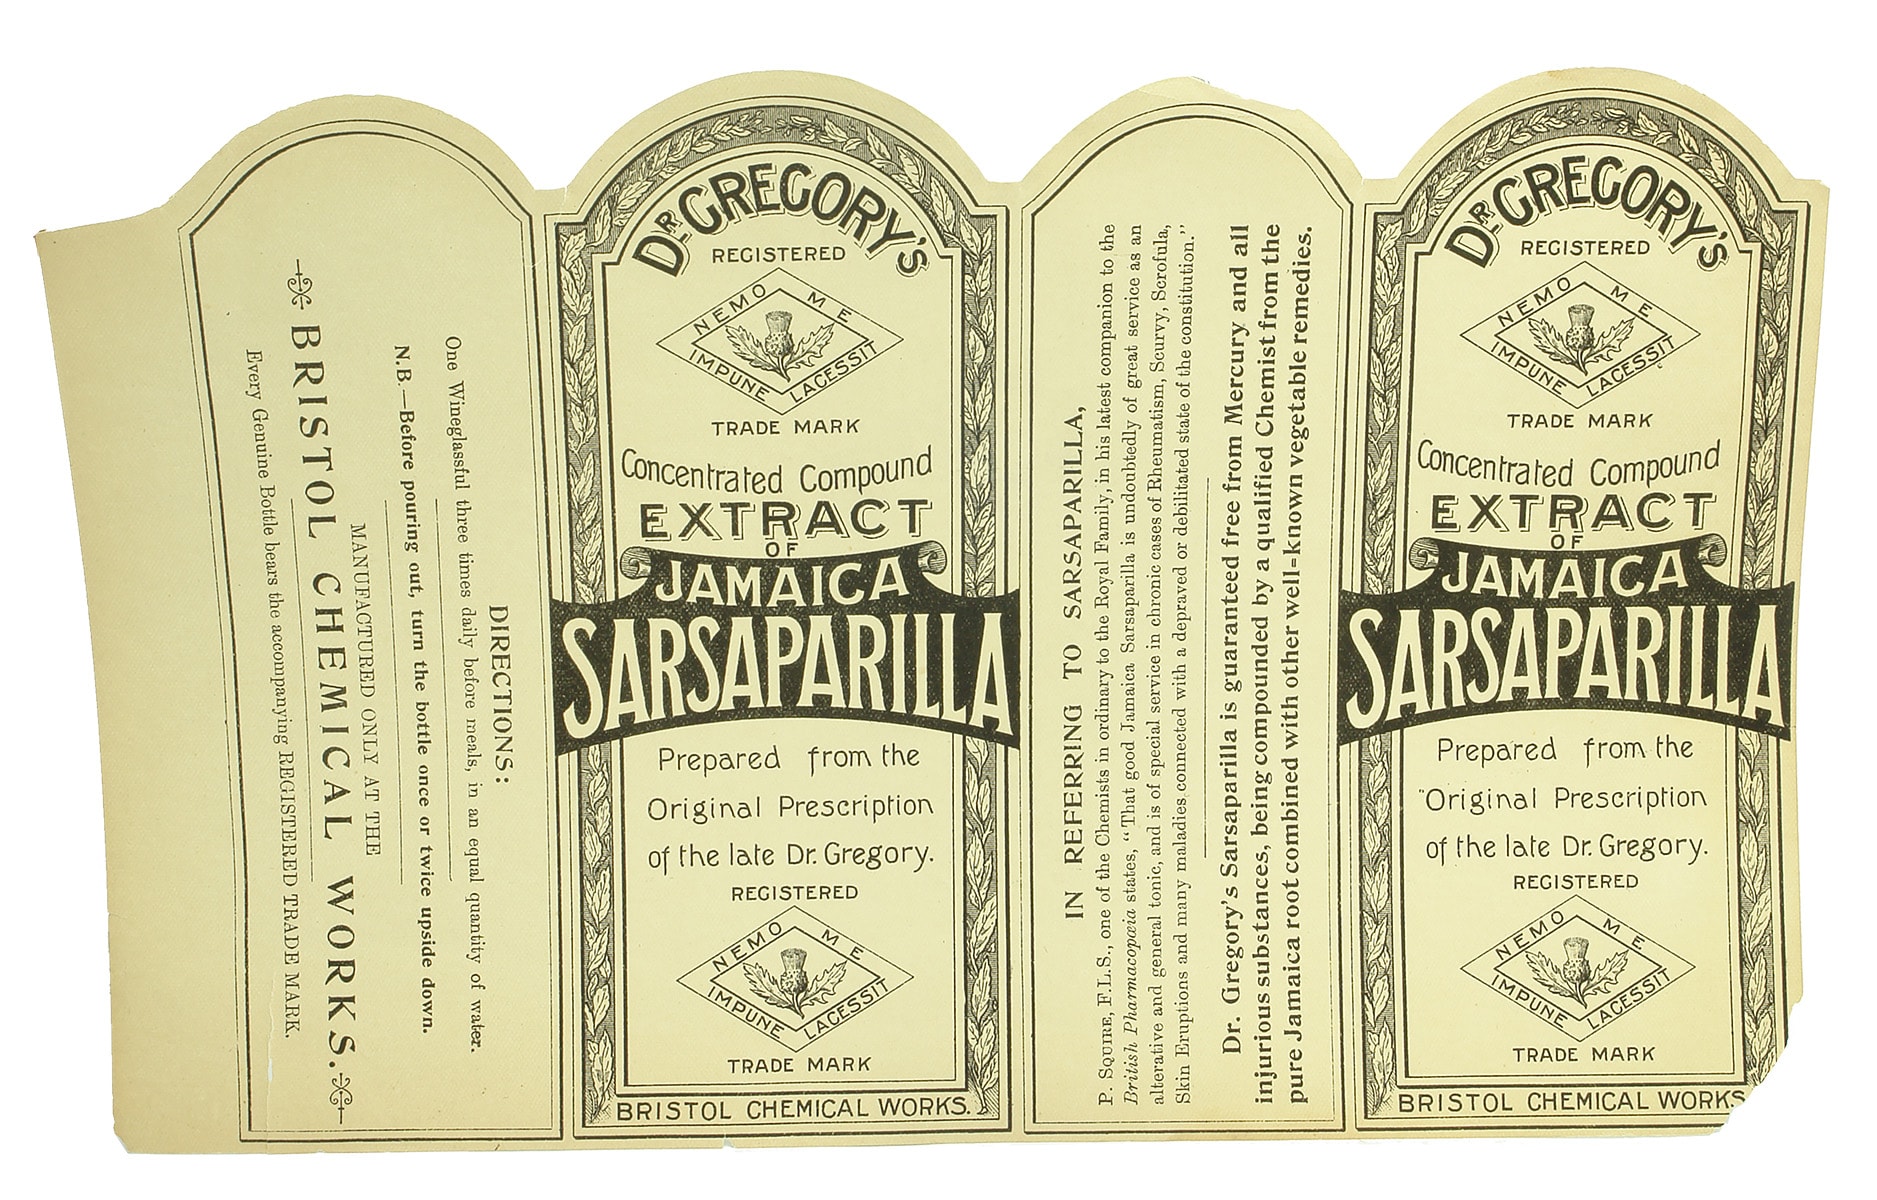 Dr Gregory's Concentrated Extract Sarsaparilla Label